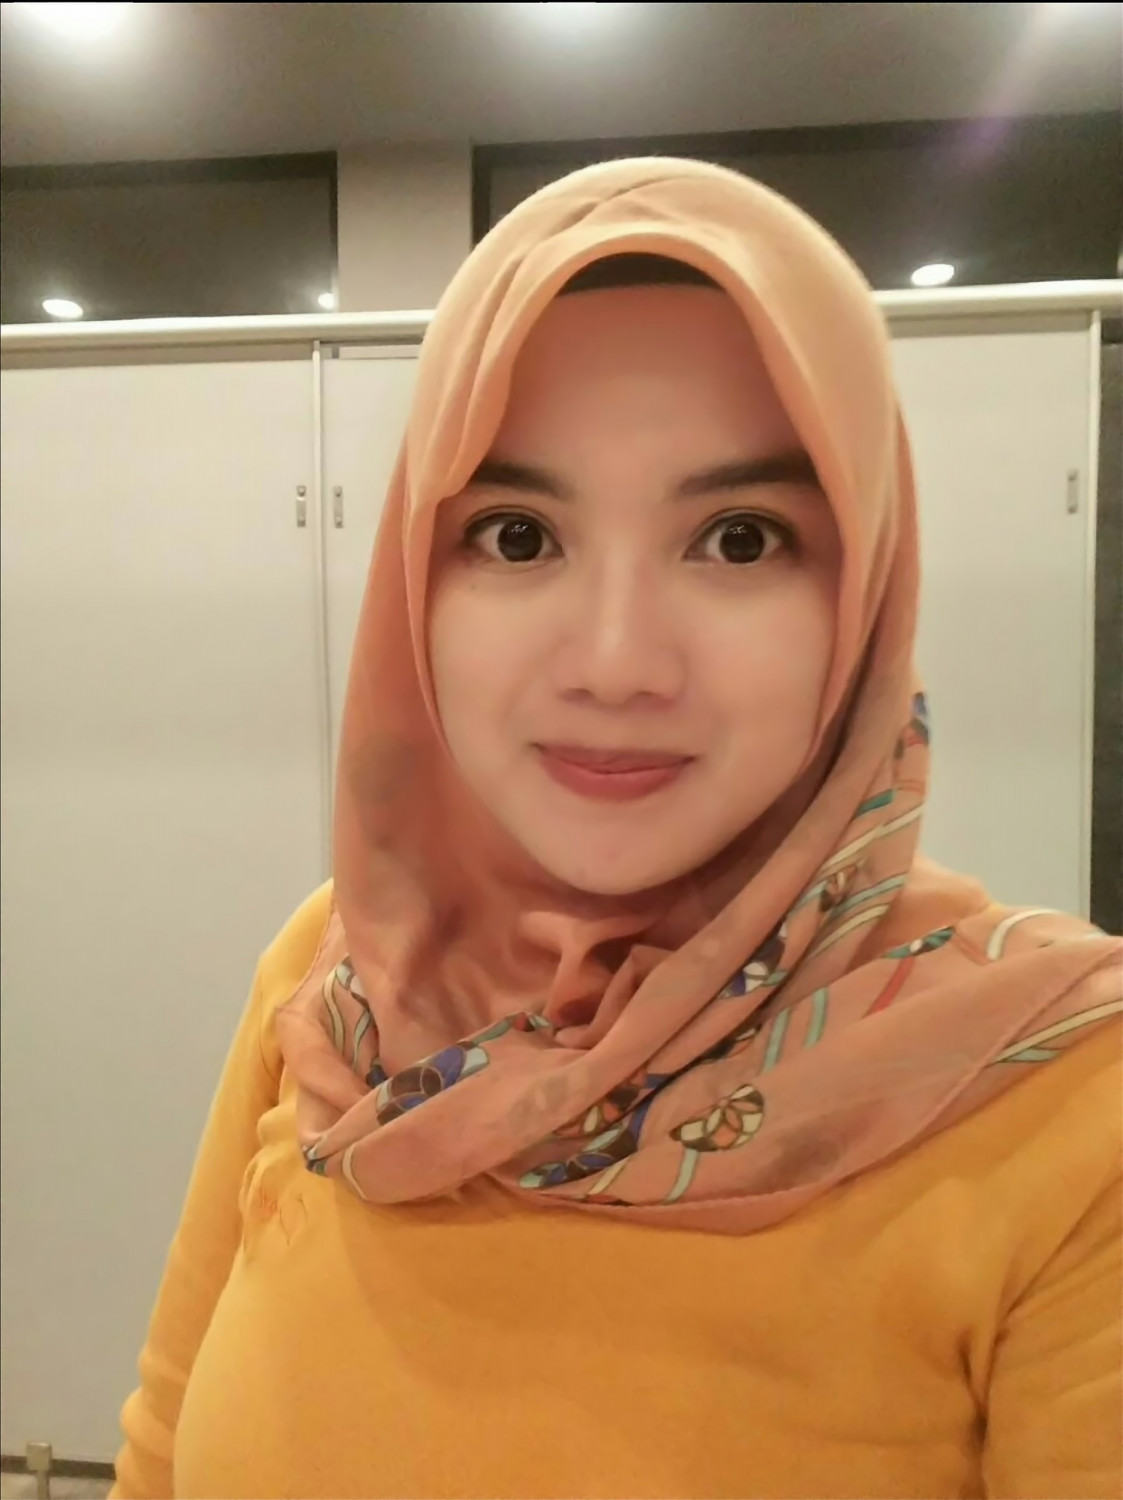 JP-0010 Malaysian muslim girl - Porn Videos and Photos picture